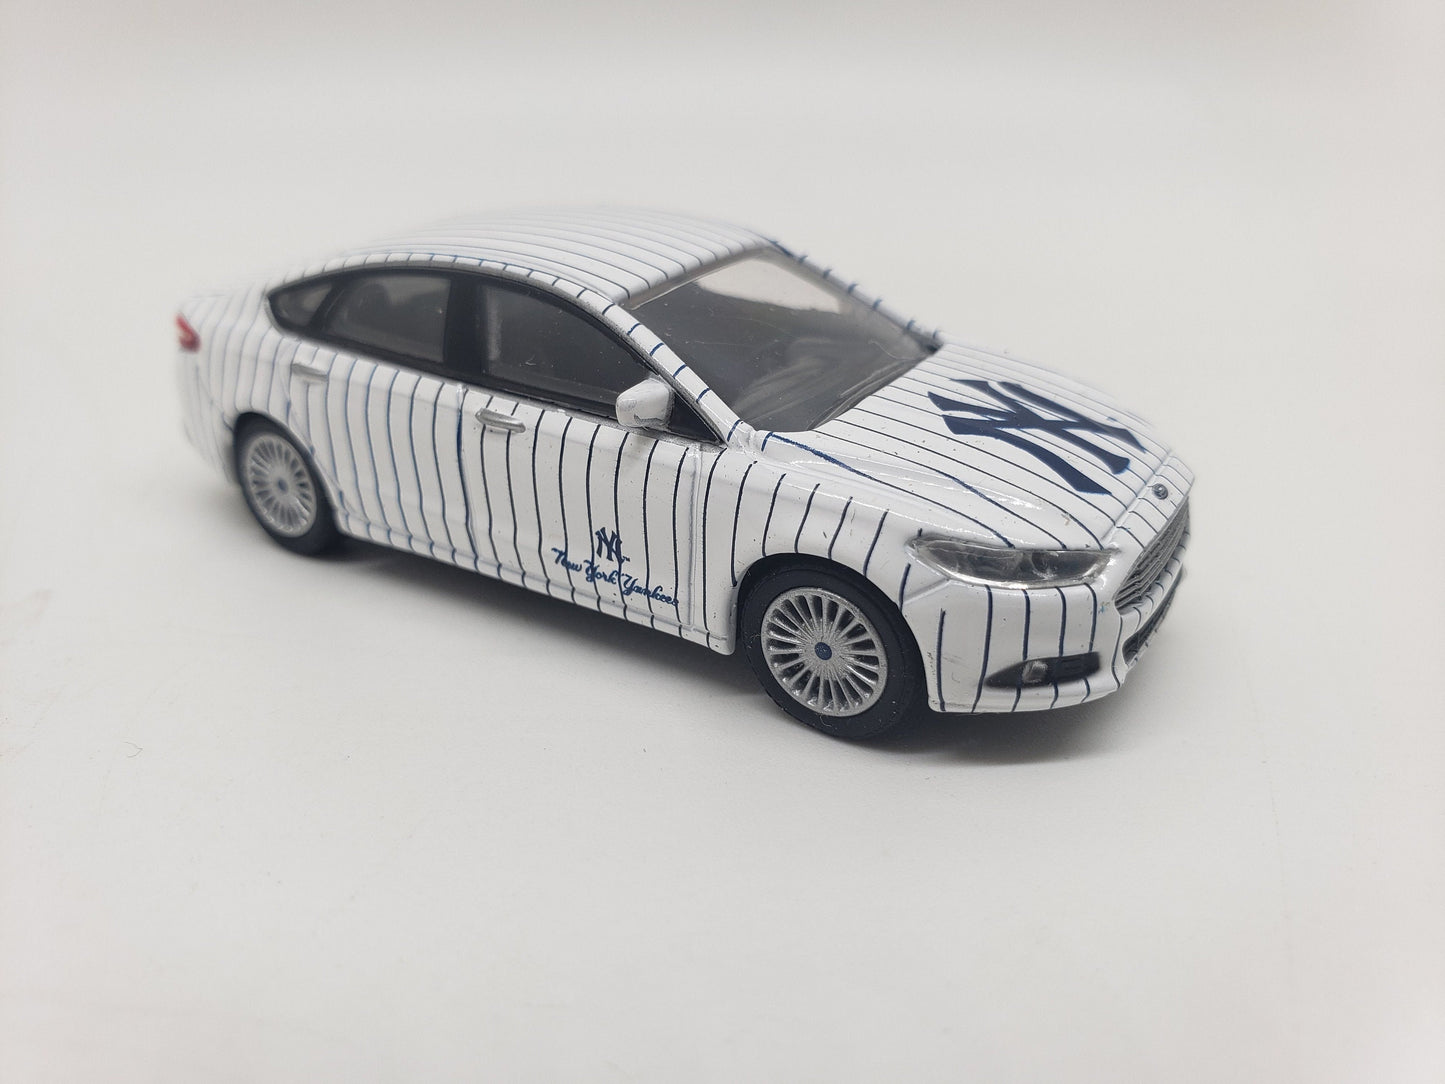 Greenlight Ford Fusion New York Yankees Perfect Birthday Gift Miniature Collectable Model Toy Car